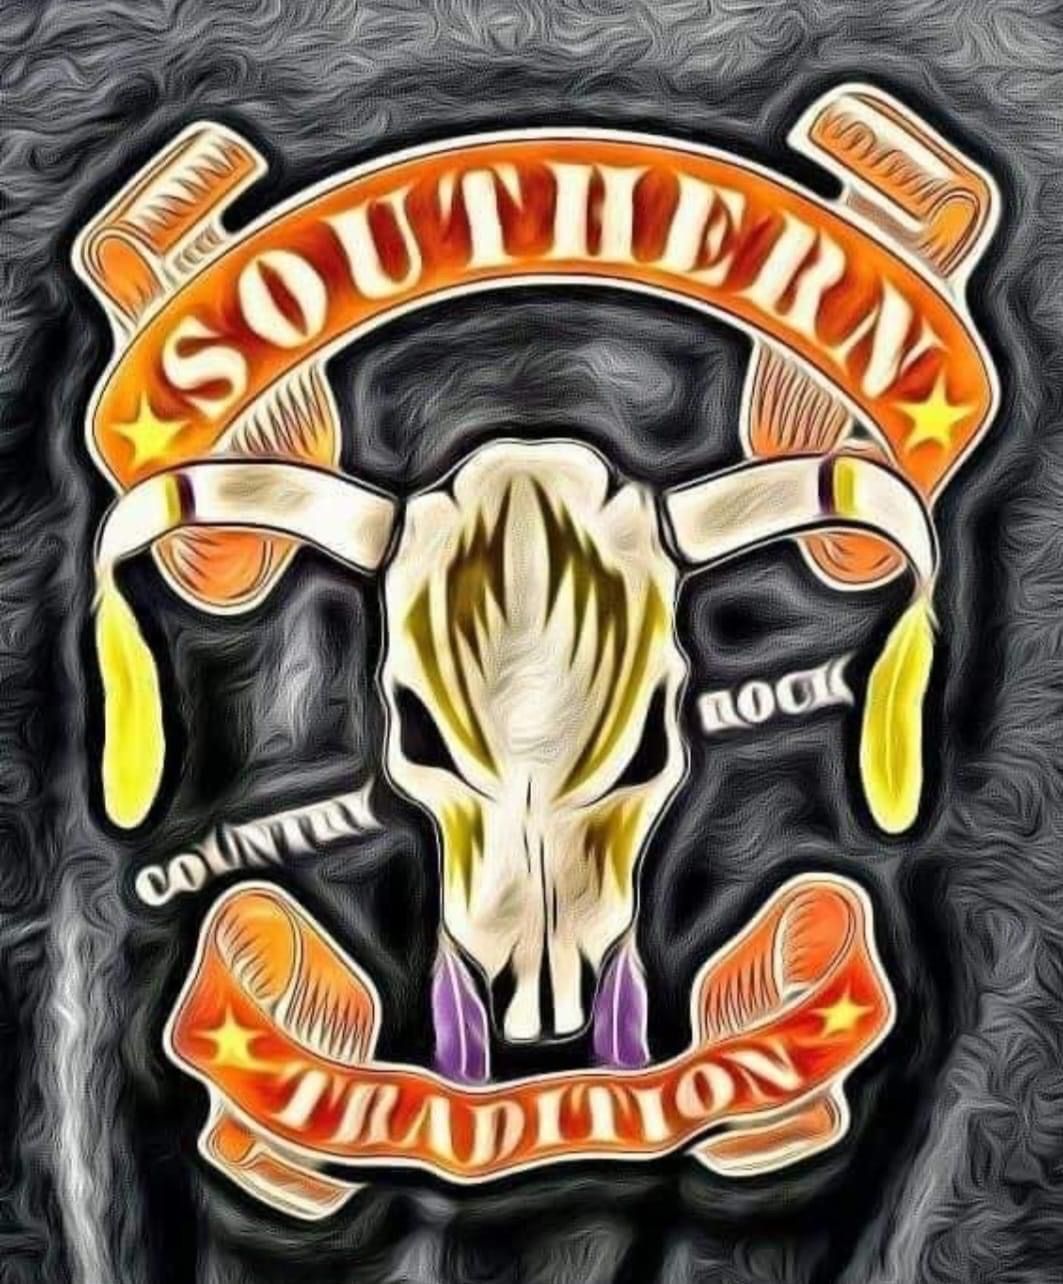 Southern Tradition Band @ Louie\u2019s 